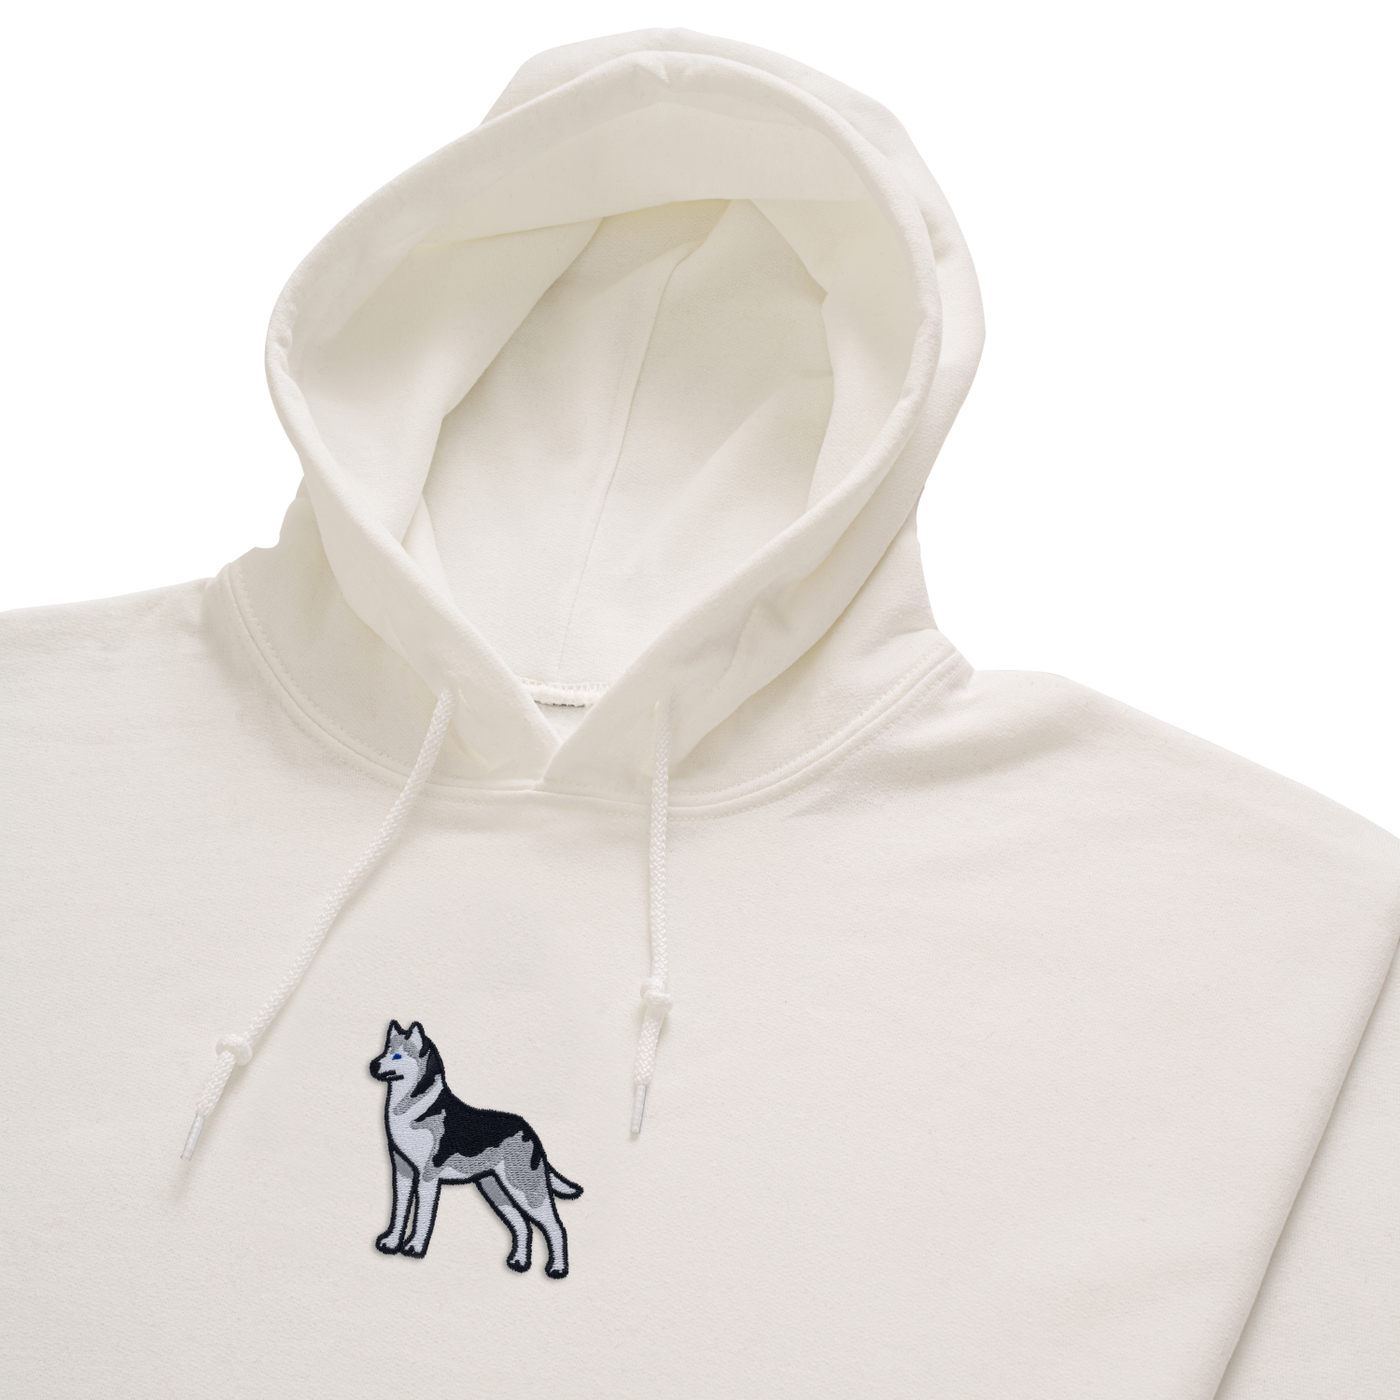 Bobby's Planet Women's Embroidered Siberian Husky Hoodie from Paws Dog Cat Animals Collection in White Color#color_white